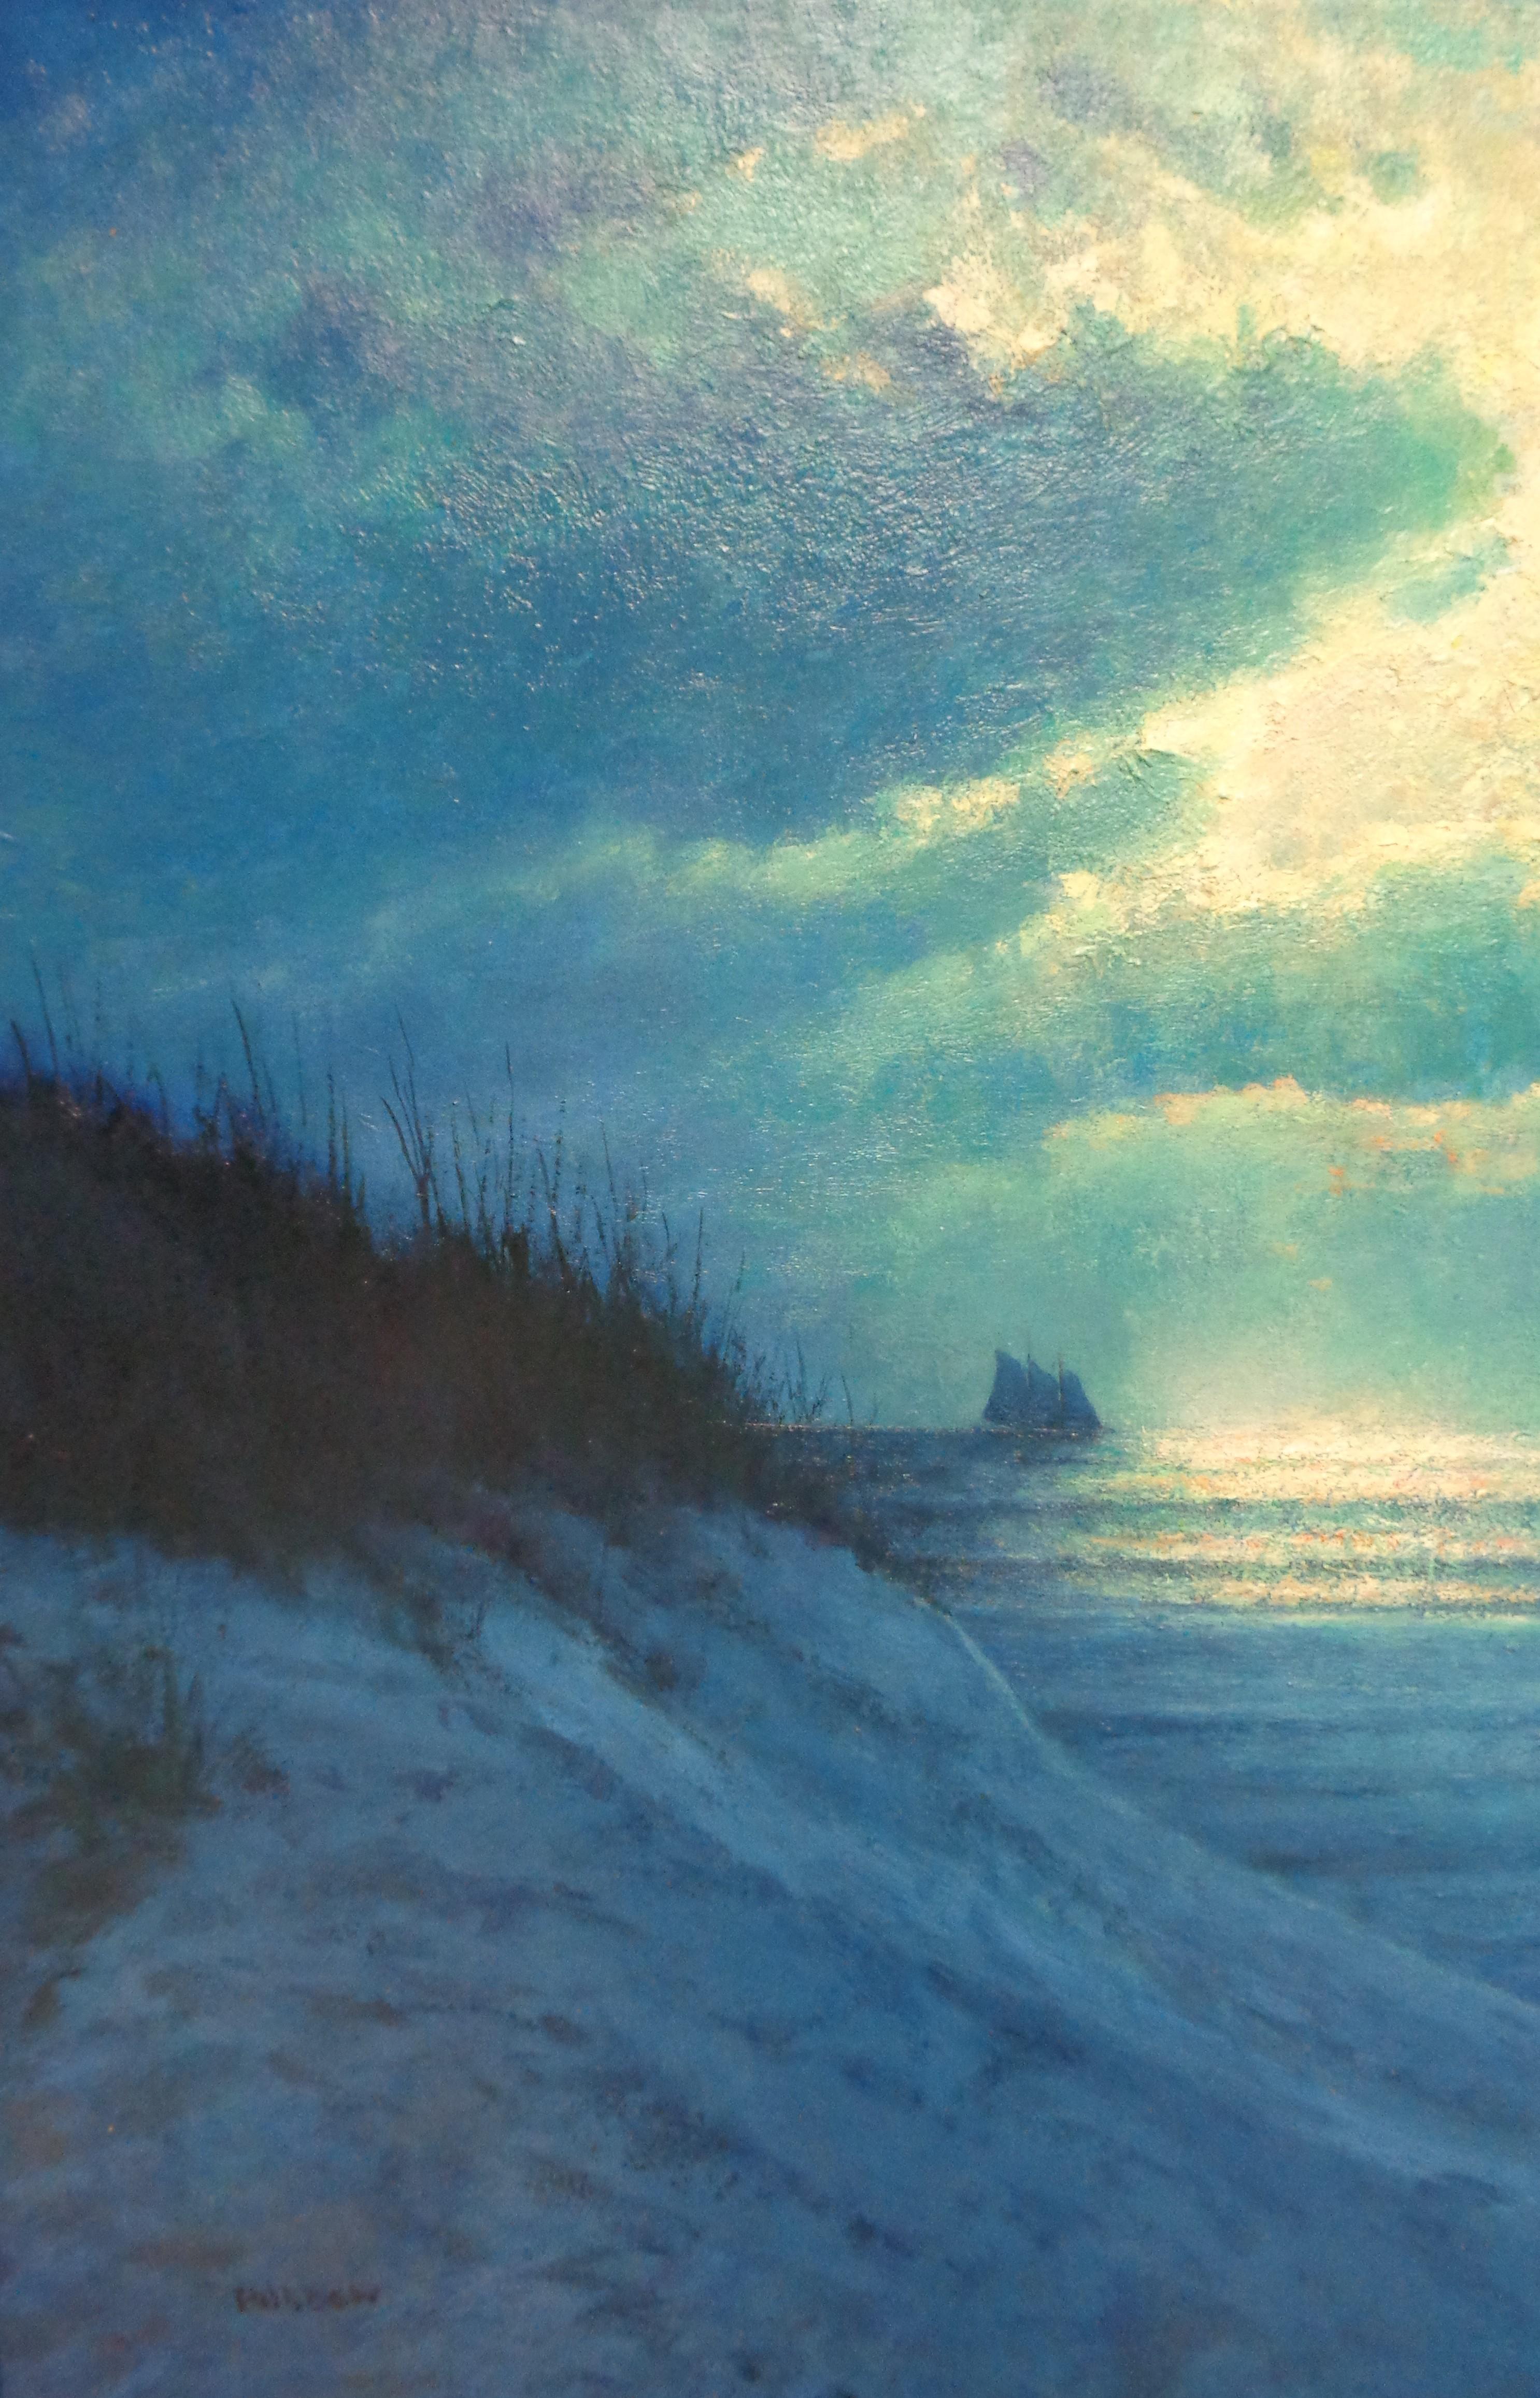 Moonlight Light Sailing
oil/canvas 26 x 26 image unframed
Moonlight Sailing  is an oil painting on canvas by award winning contemporary artist Michael Budden that showcases a beautiful and dramatic moonlit view of the ocean thru the dunes and beach